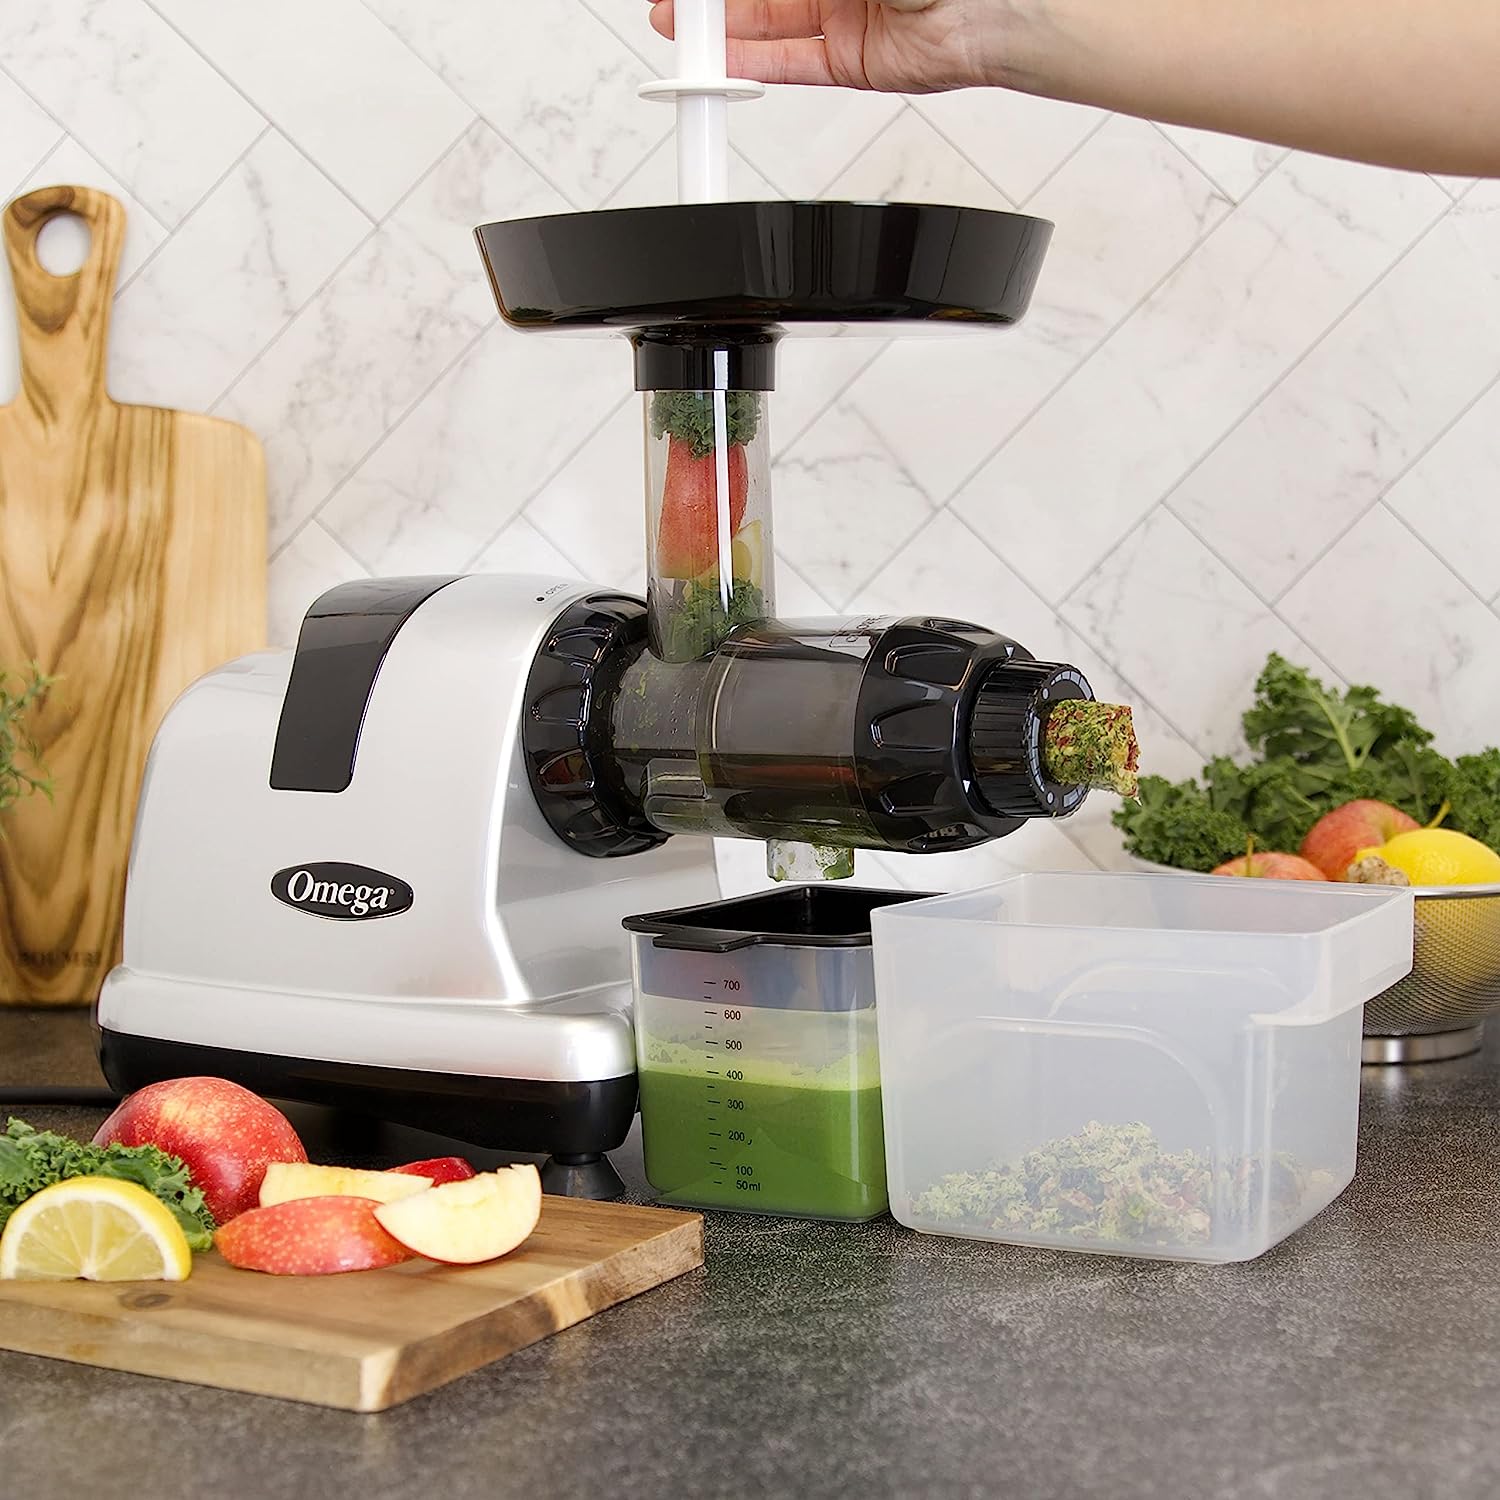 Where To Buy An Omega Juicer